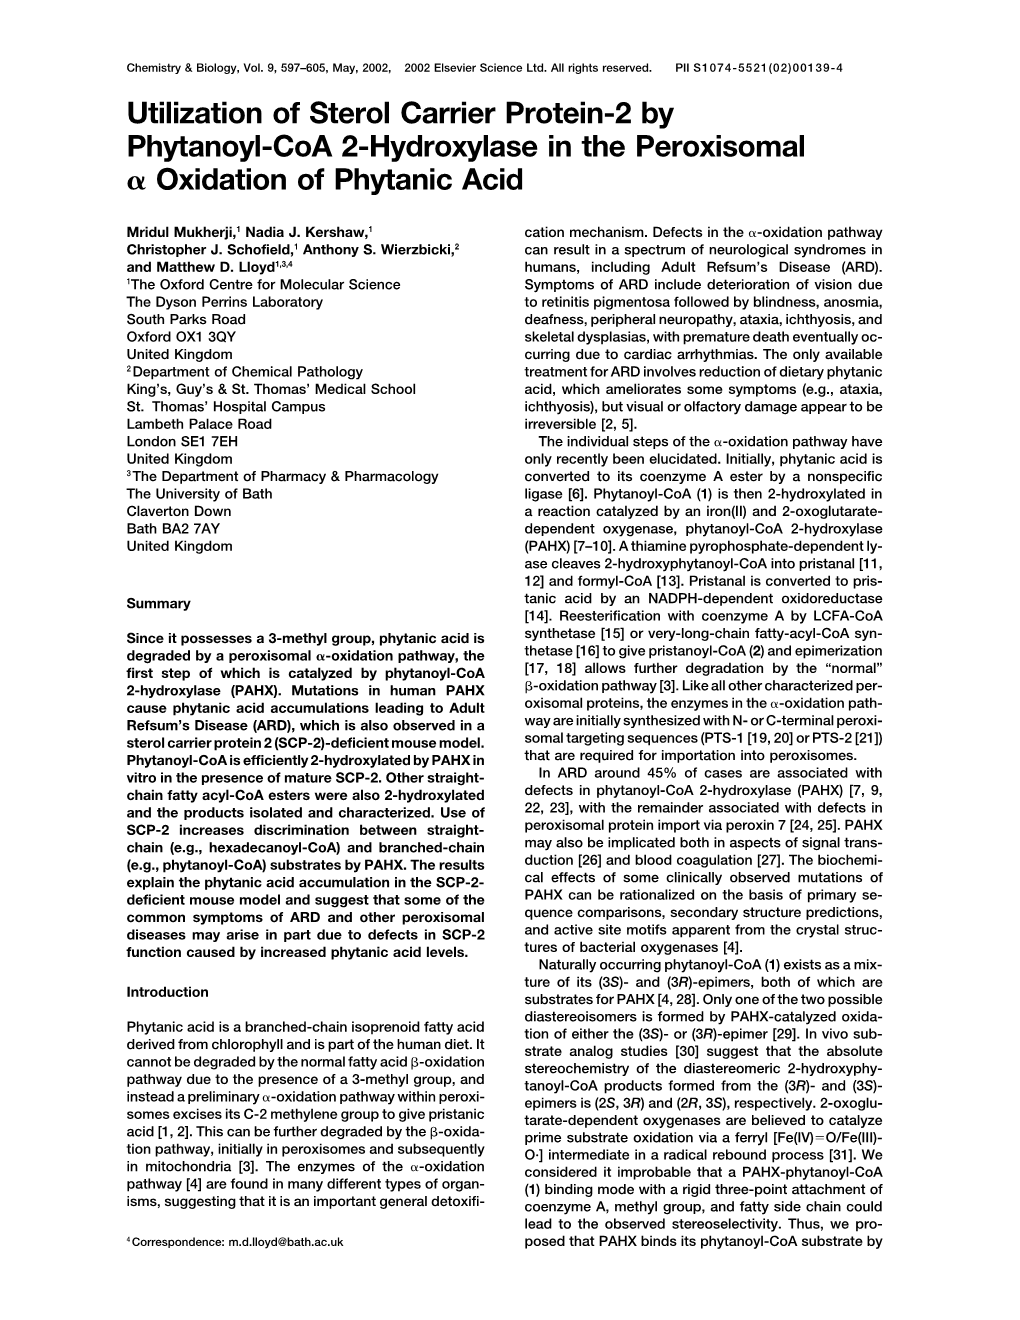 Utilization of Sterol Carrier Protein-2 by Phytanoyl-Coa 2-Hydroxylase in the Peroxisomal Oxidation of Phytanic Acid